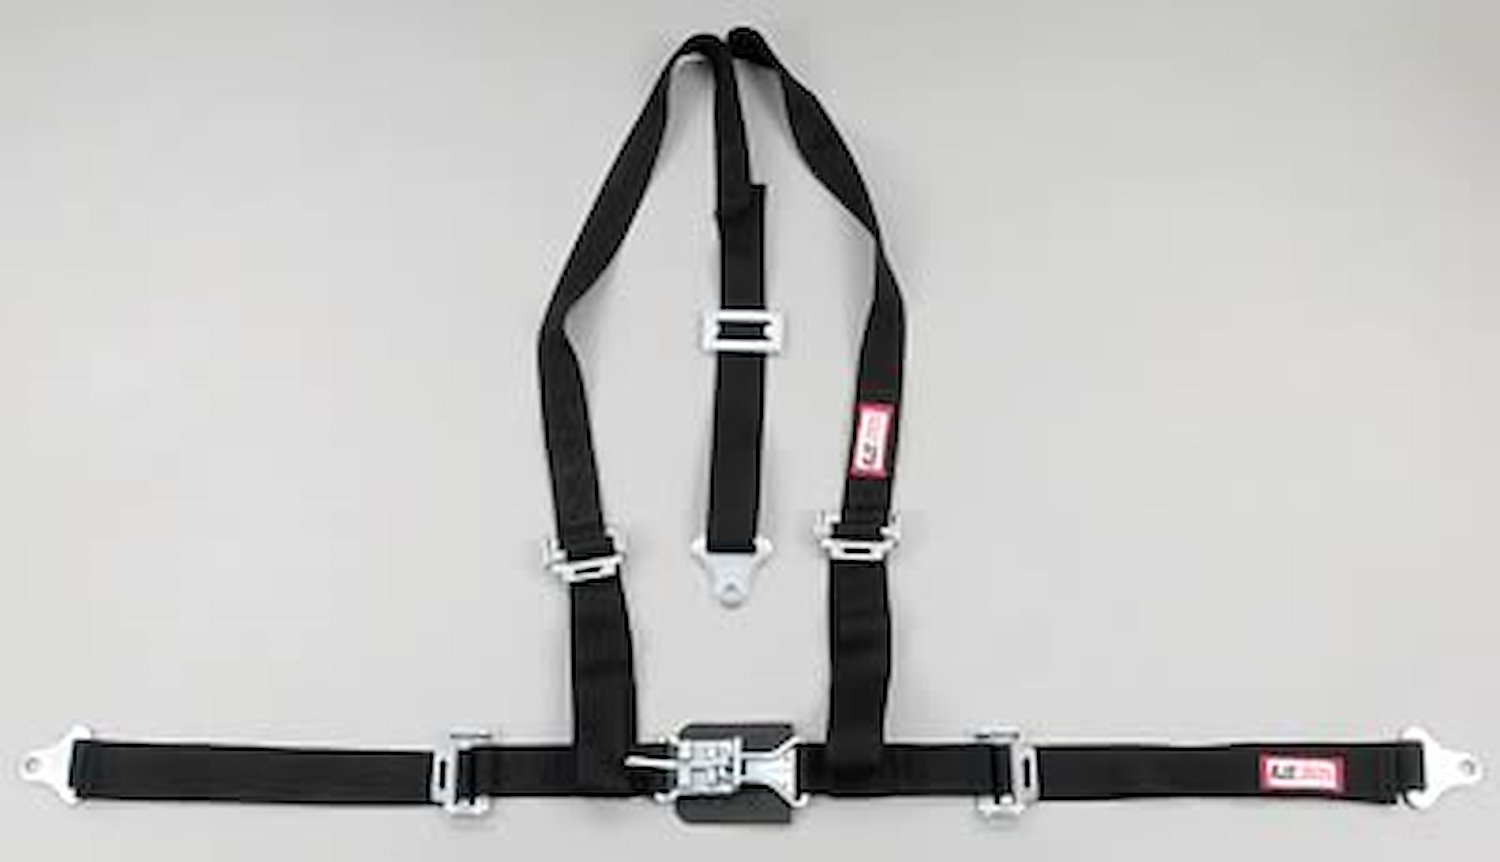 NON-SFI L&L HARNESS 2 PULL DOWN Lap Belt w/Adjuster SNAP 2 S.H. Y FLOOR MOUNT w/STERNUM STRAP WRAP/SNAP GRAY